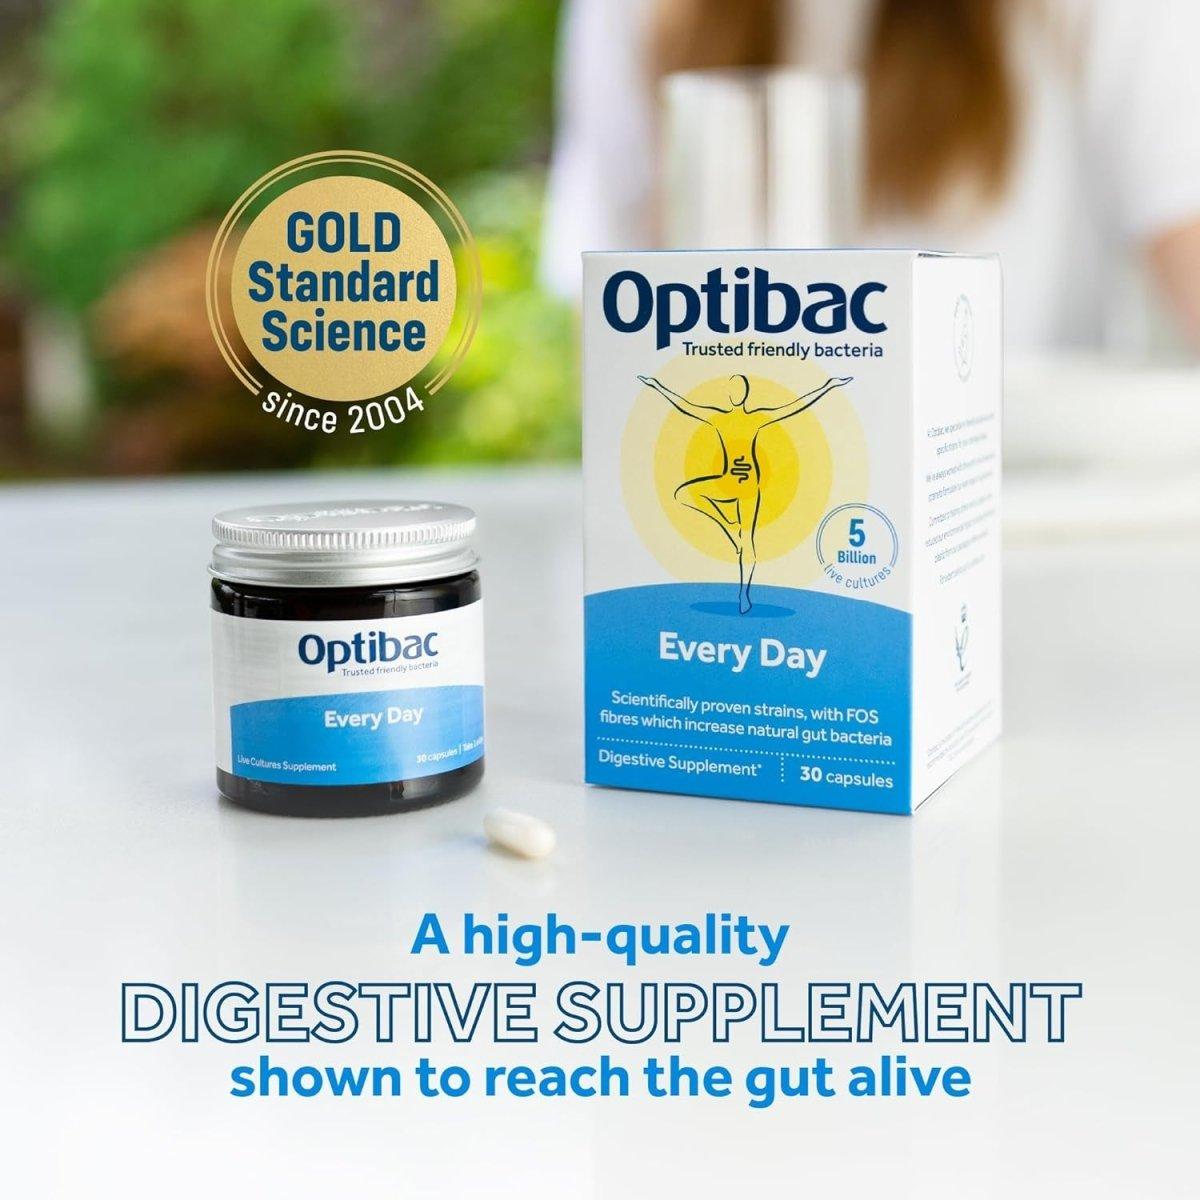 Optibac Every Day - Digestive Probiotic Supplement with 5 Billion Bacterial Cultures & FOS Fibres - 30 Capsules - Glam Global UK